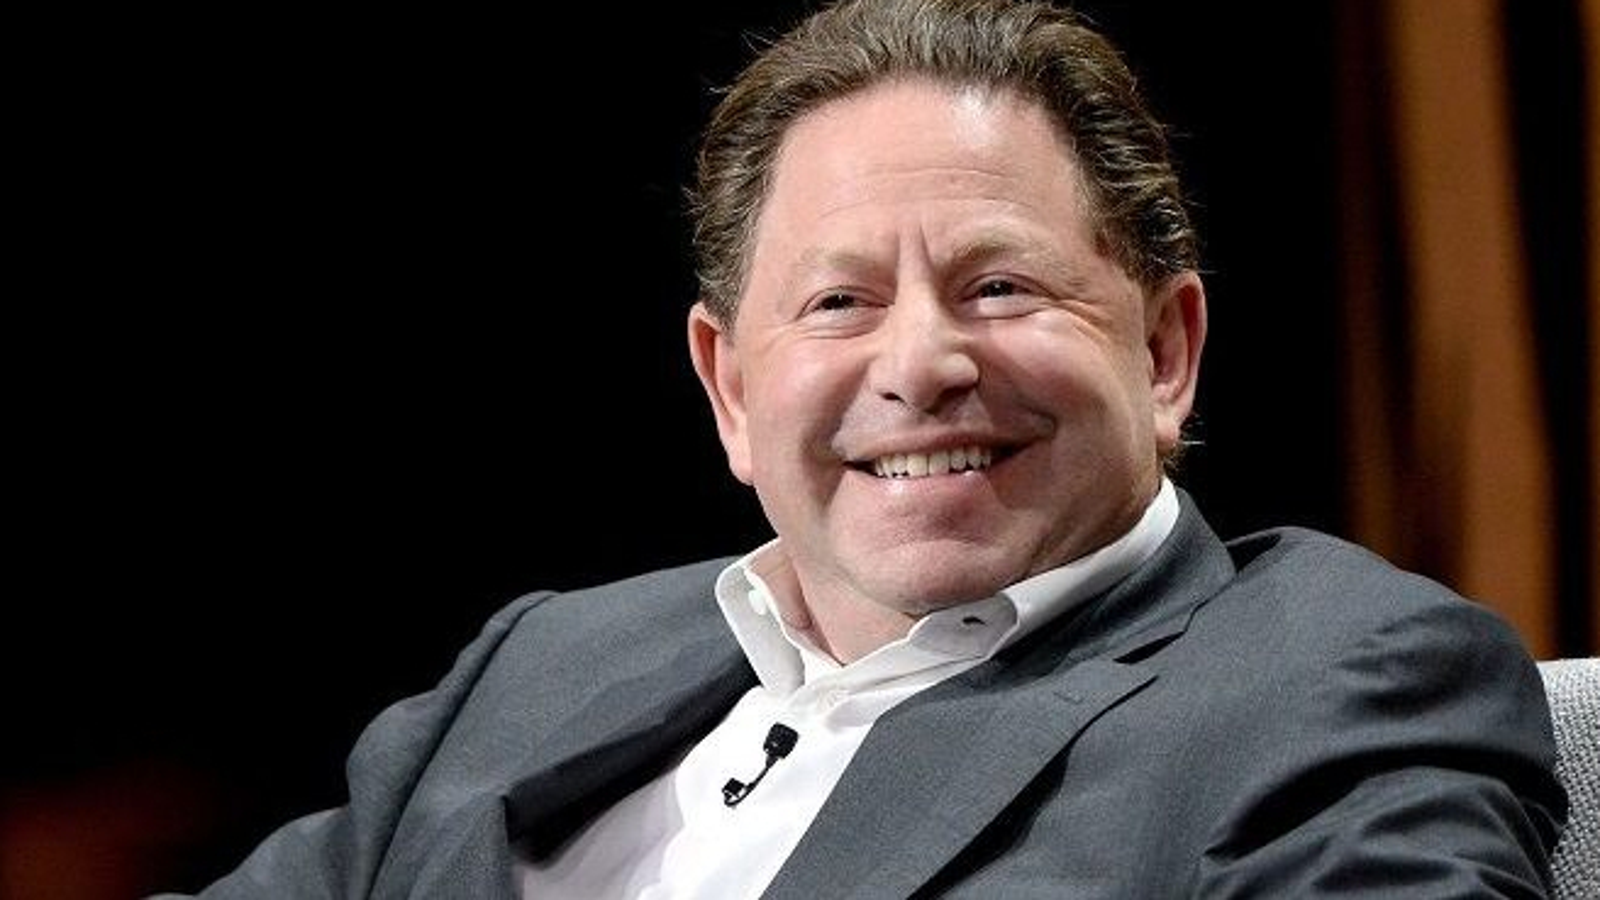 Activision never had "systemic issue with harassment", says CEO Bobby Kotick  | Eurogamer.net